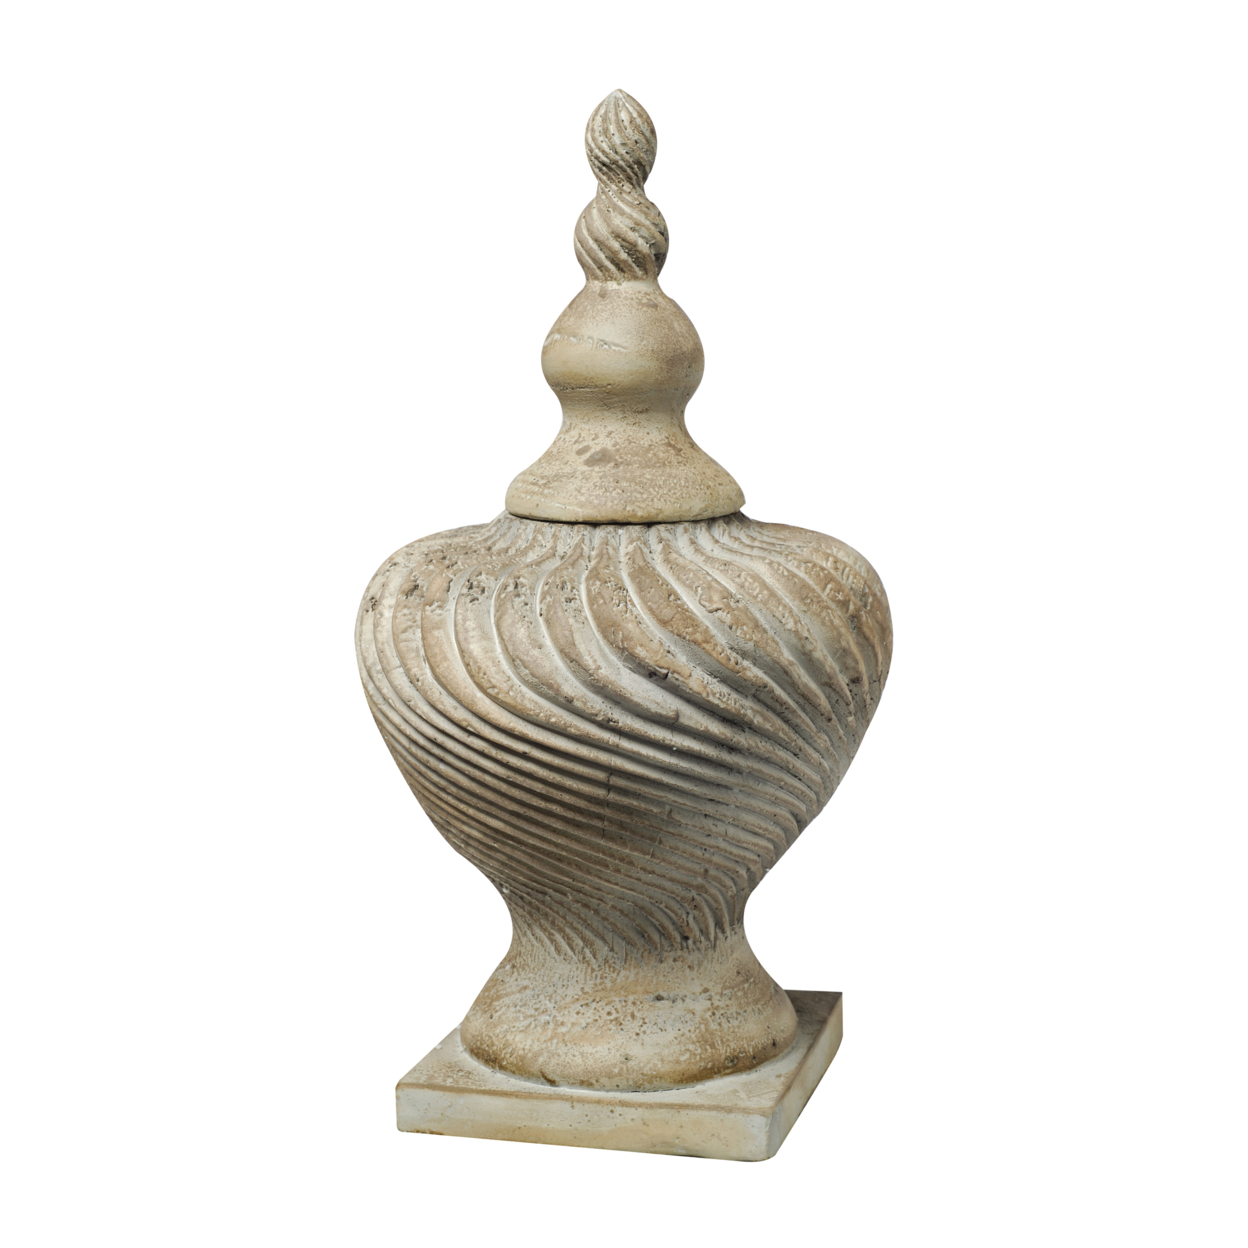 22 Inch Lidded Vase With Turned Finial Design And Swirl Pattern, White- Saltoro Sherpi